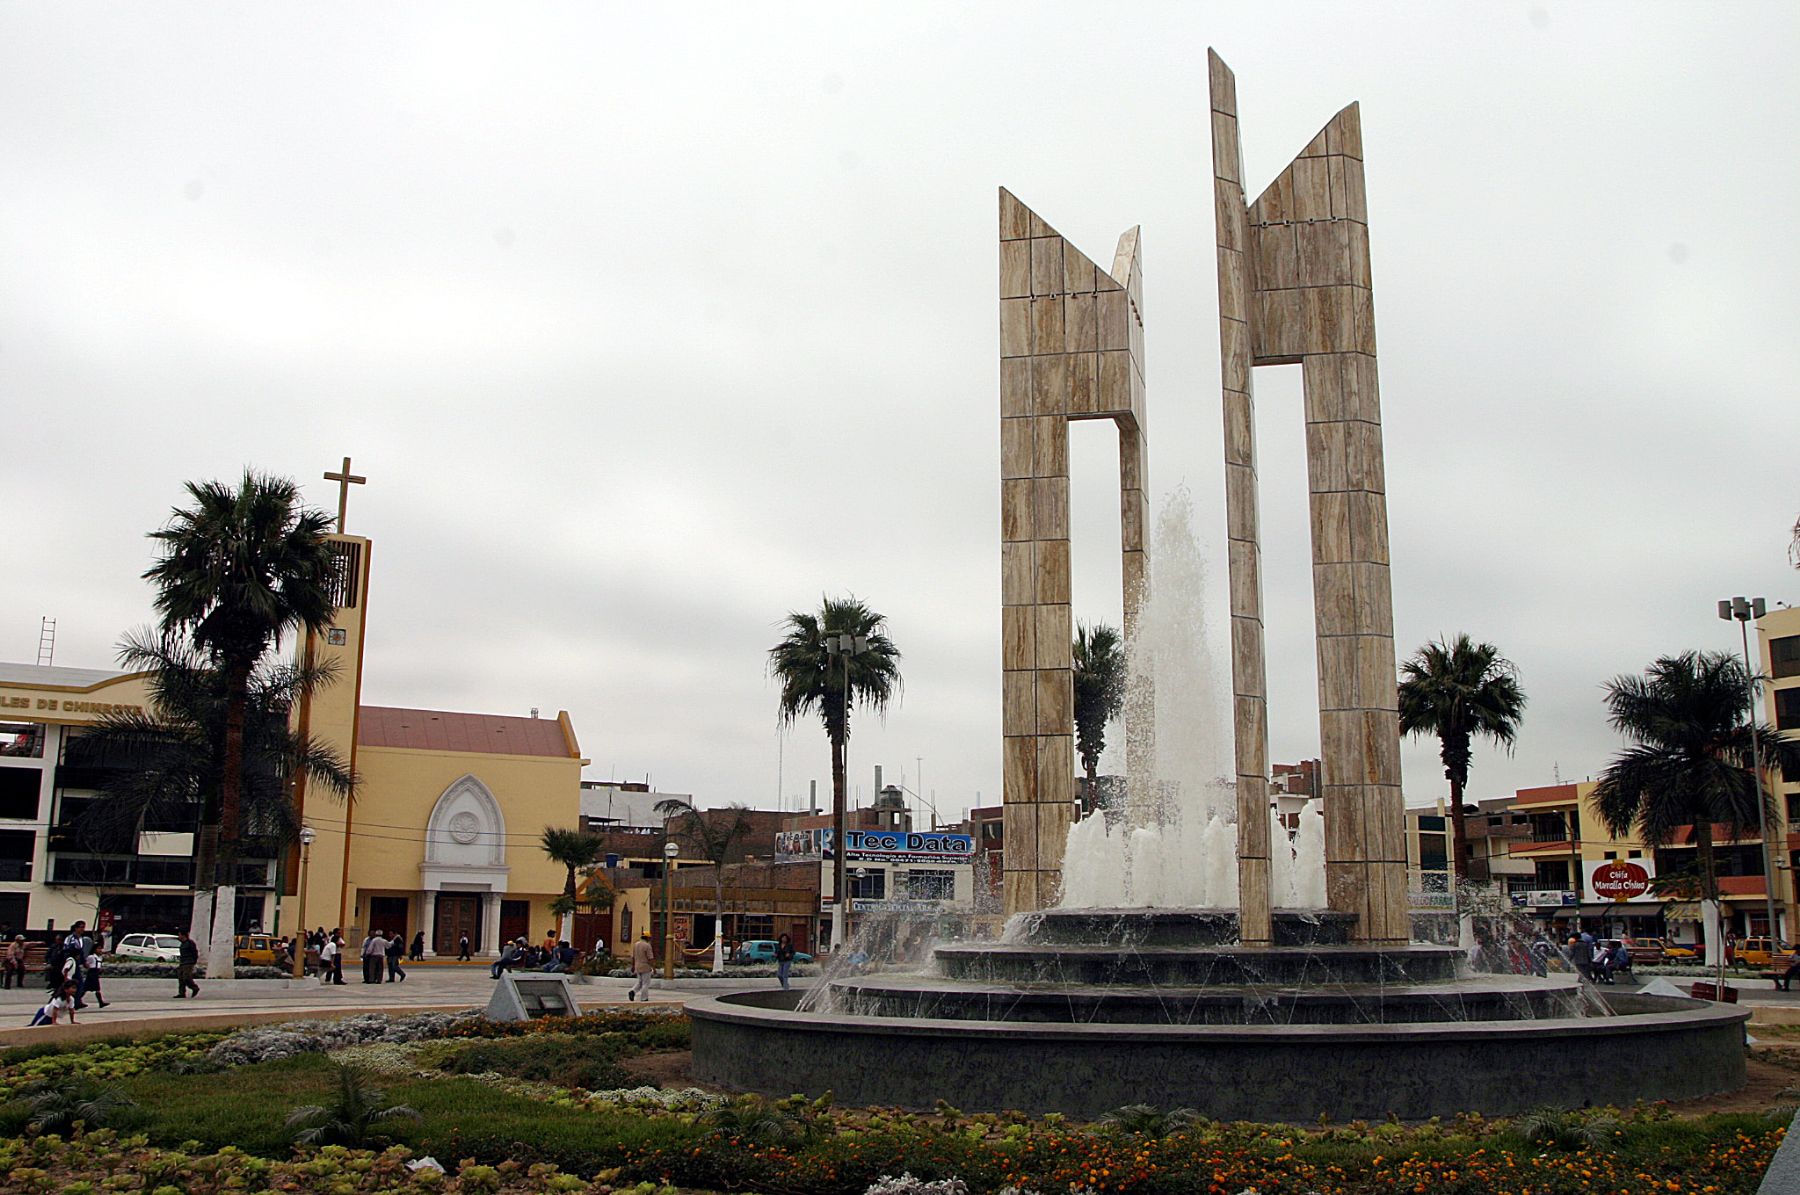 District of Nuevo Chimbote, located in northern Peru